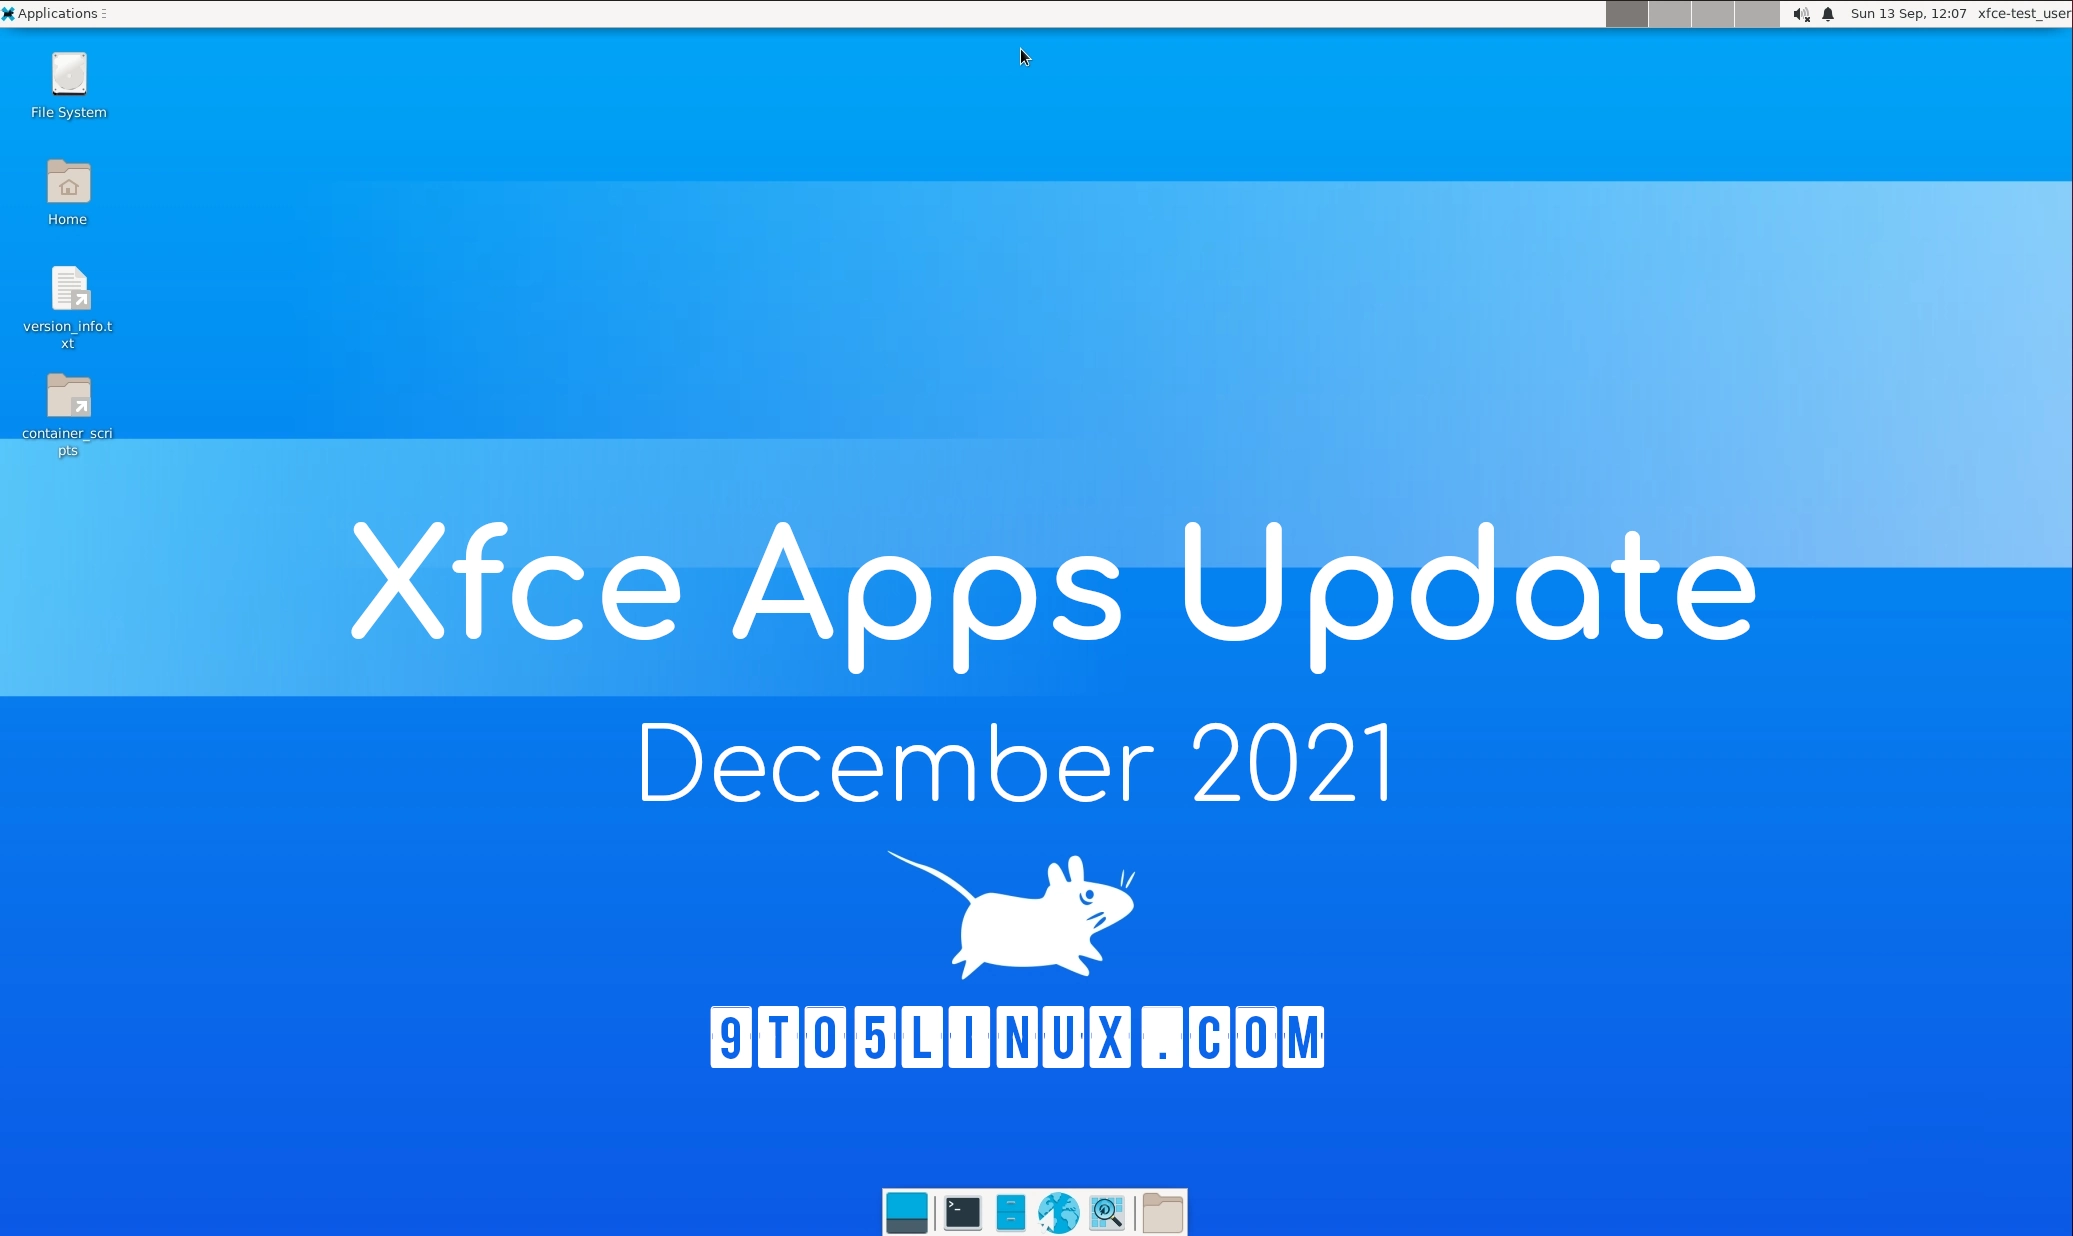 Xfce’s Apps Update for December 2021: New Releases of Xfce Terminal, Whisker Menu, and More